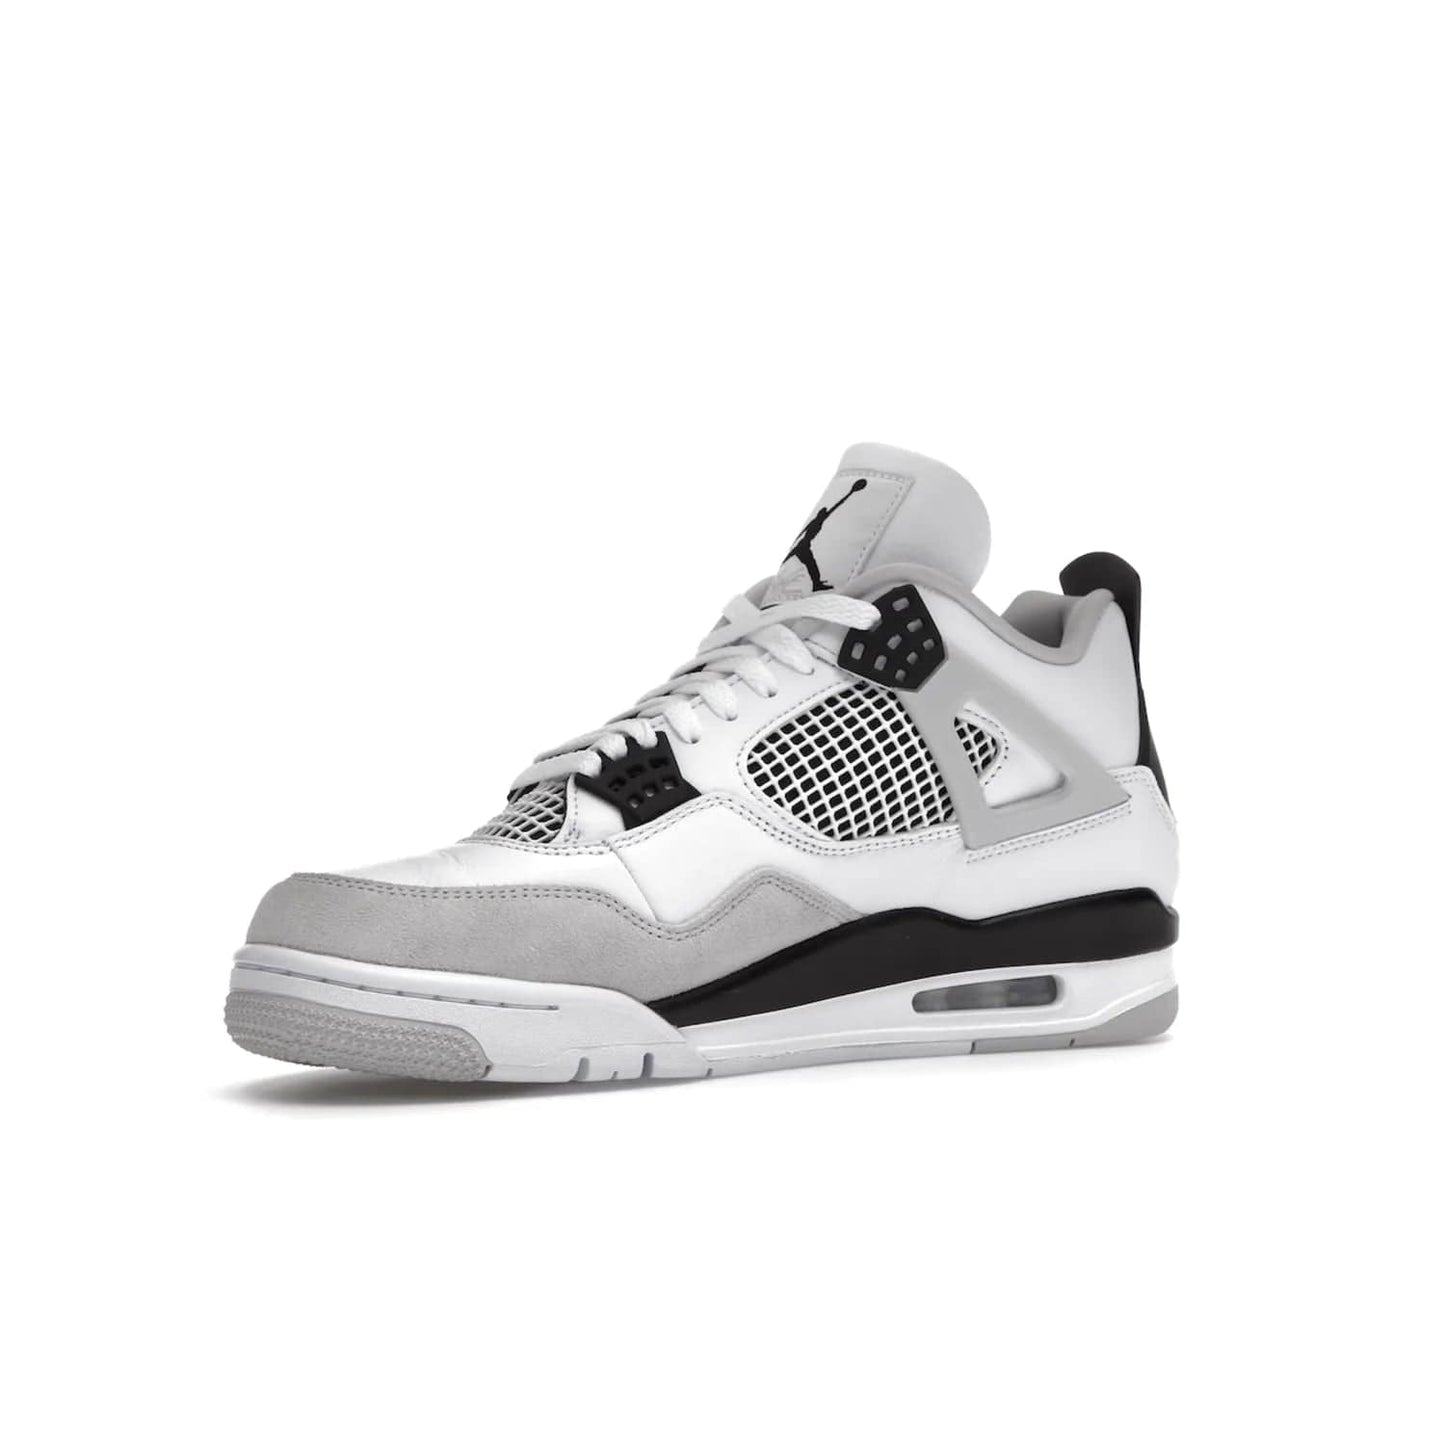 Jordan 4 Retro Military Black - Image 16 - Only at www.BallersClubKickz.com - Updated Air Jordan 4 style with a white/black/light grey sole and visible Air unit. Released in May 2022, offering timeless classic style and comfort.